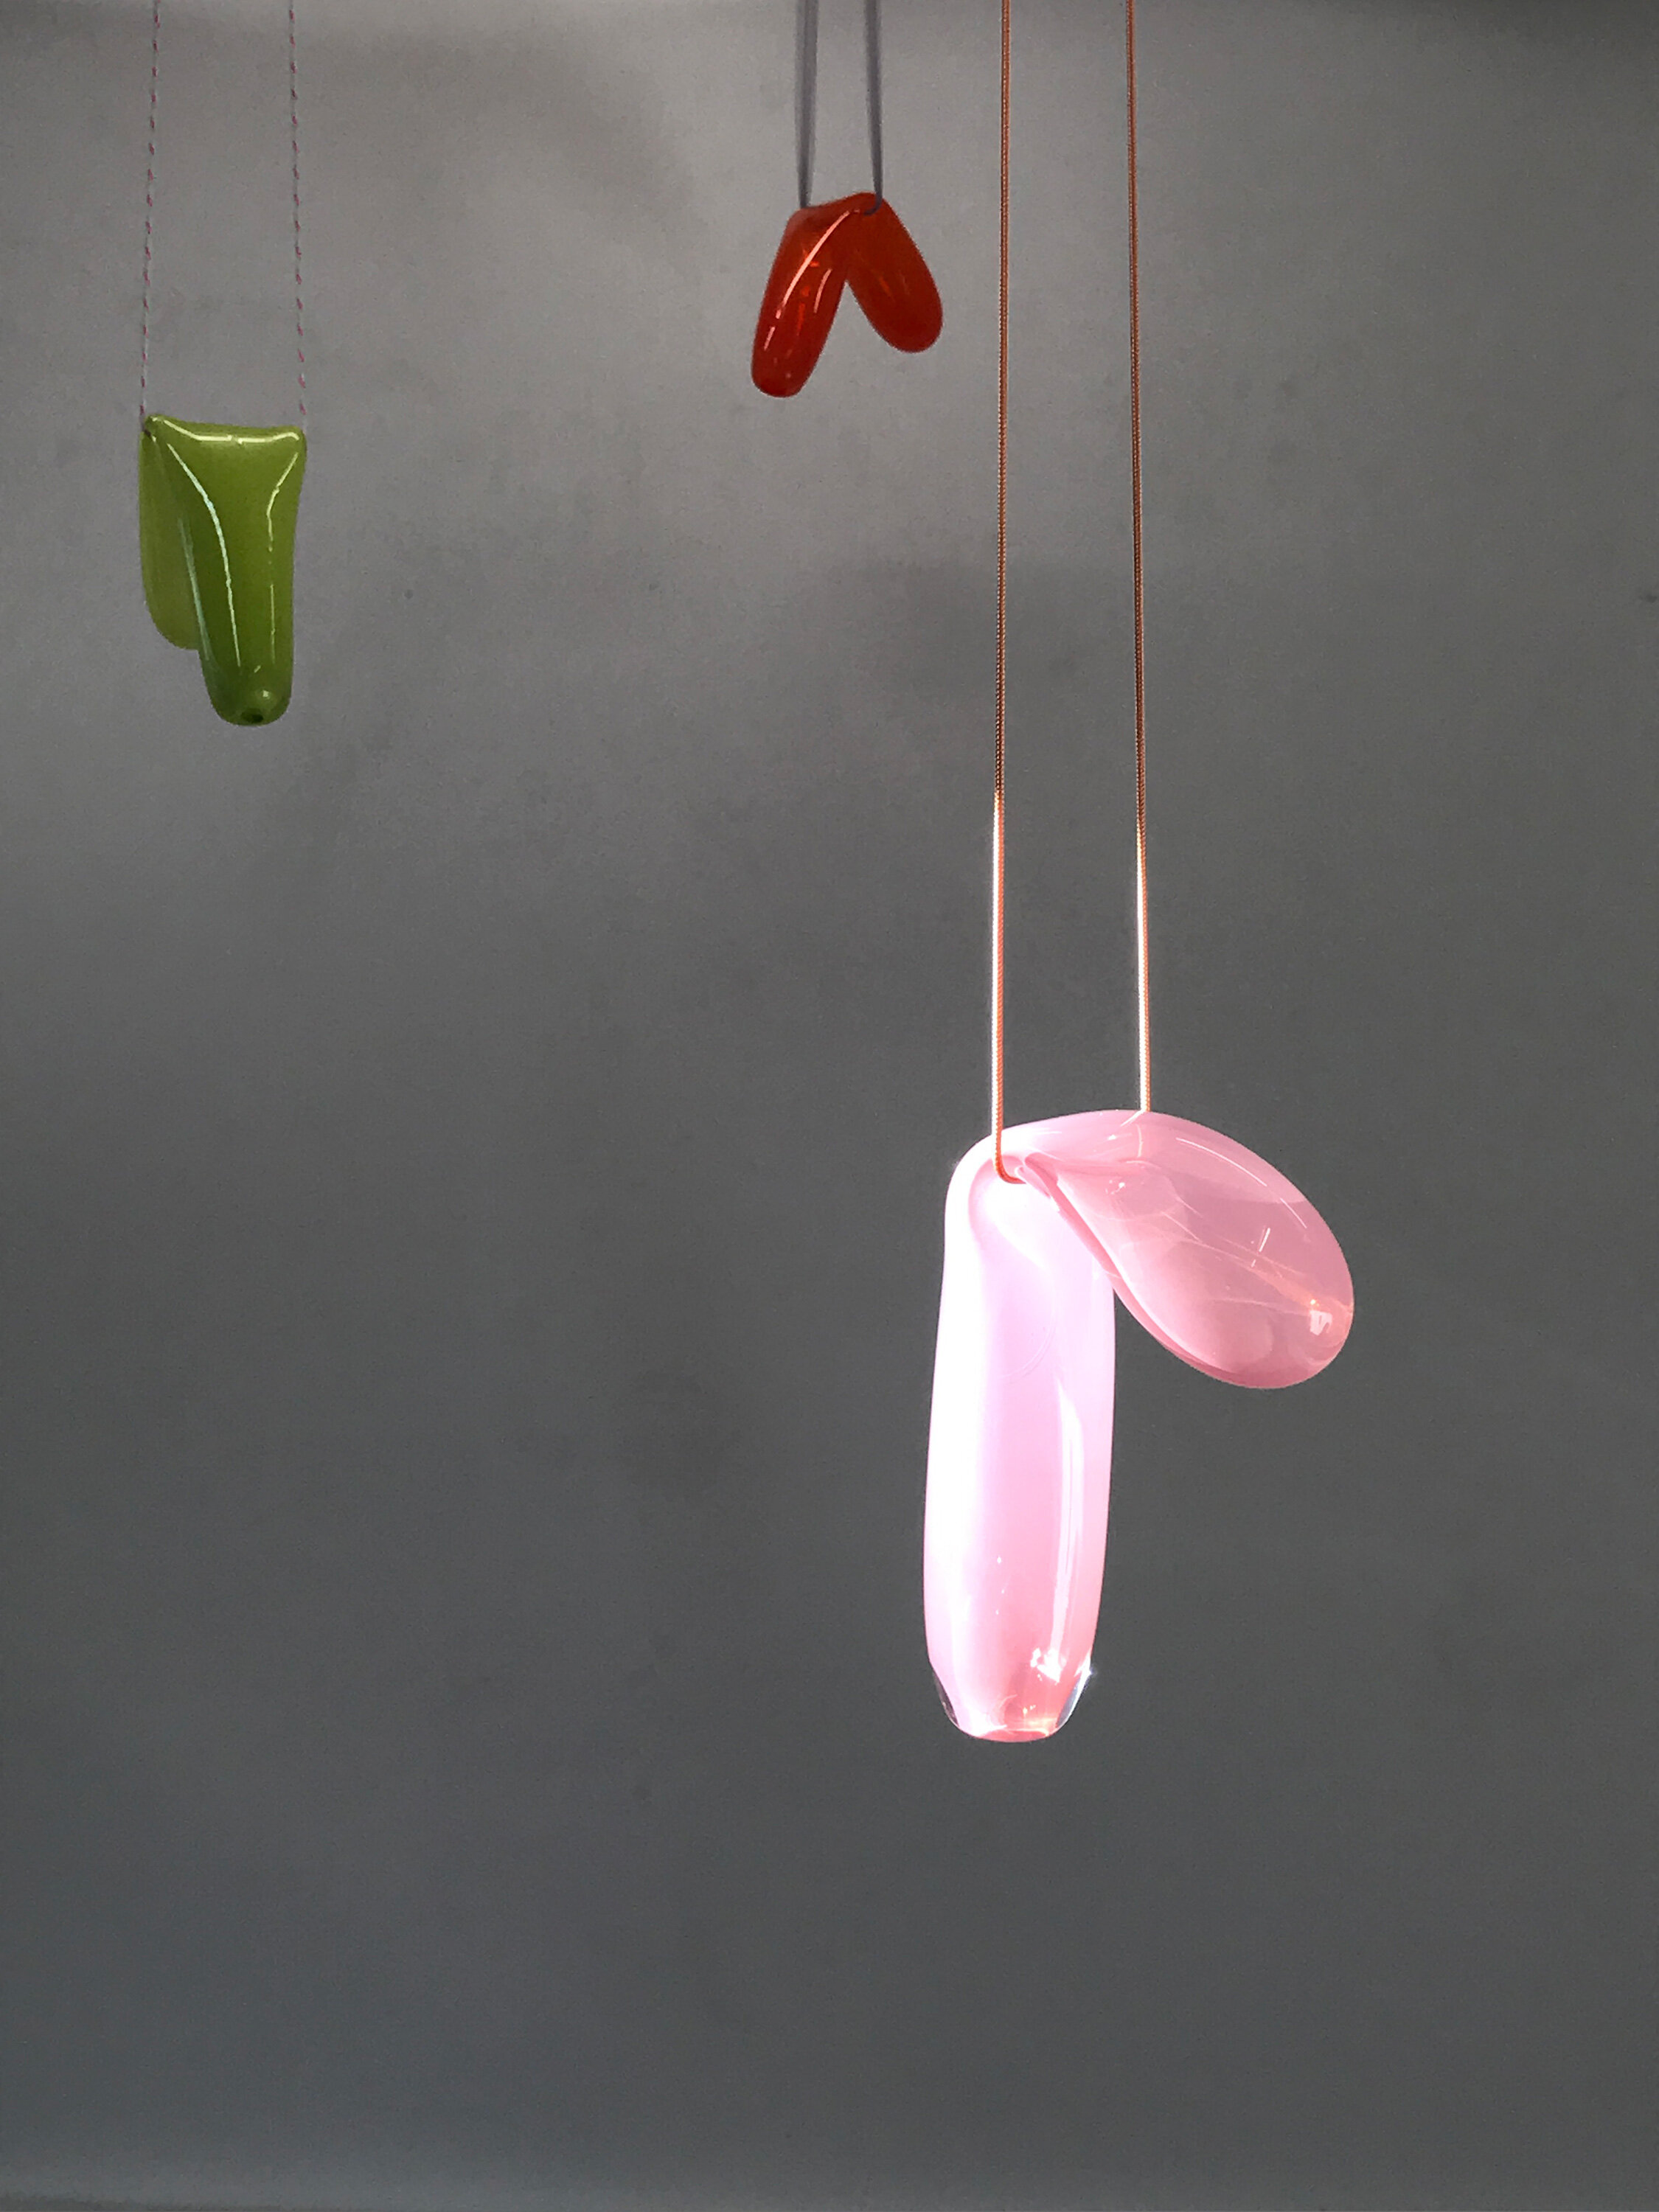  Kelly M O'Brien,  Handle With Care  (installation view). Glass, cord, tulle. 145 x 134 x 155 cm ©2020 